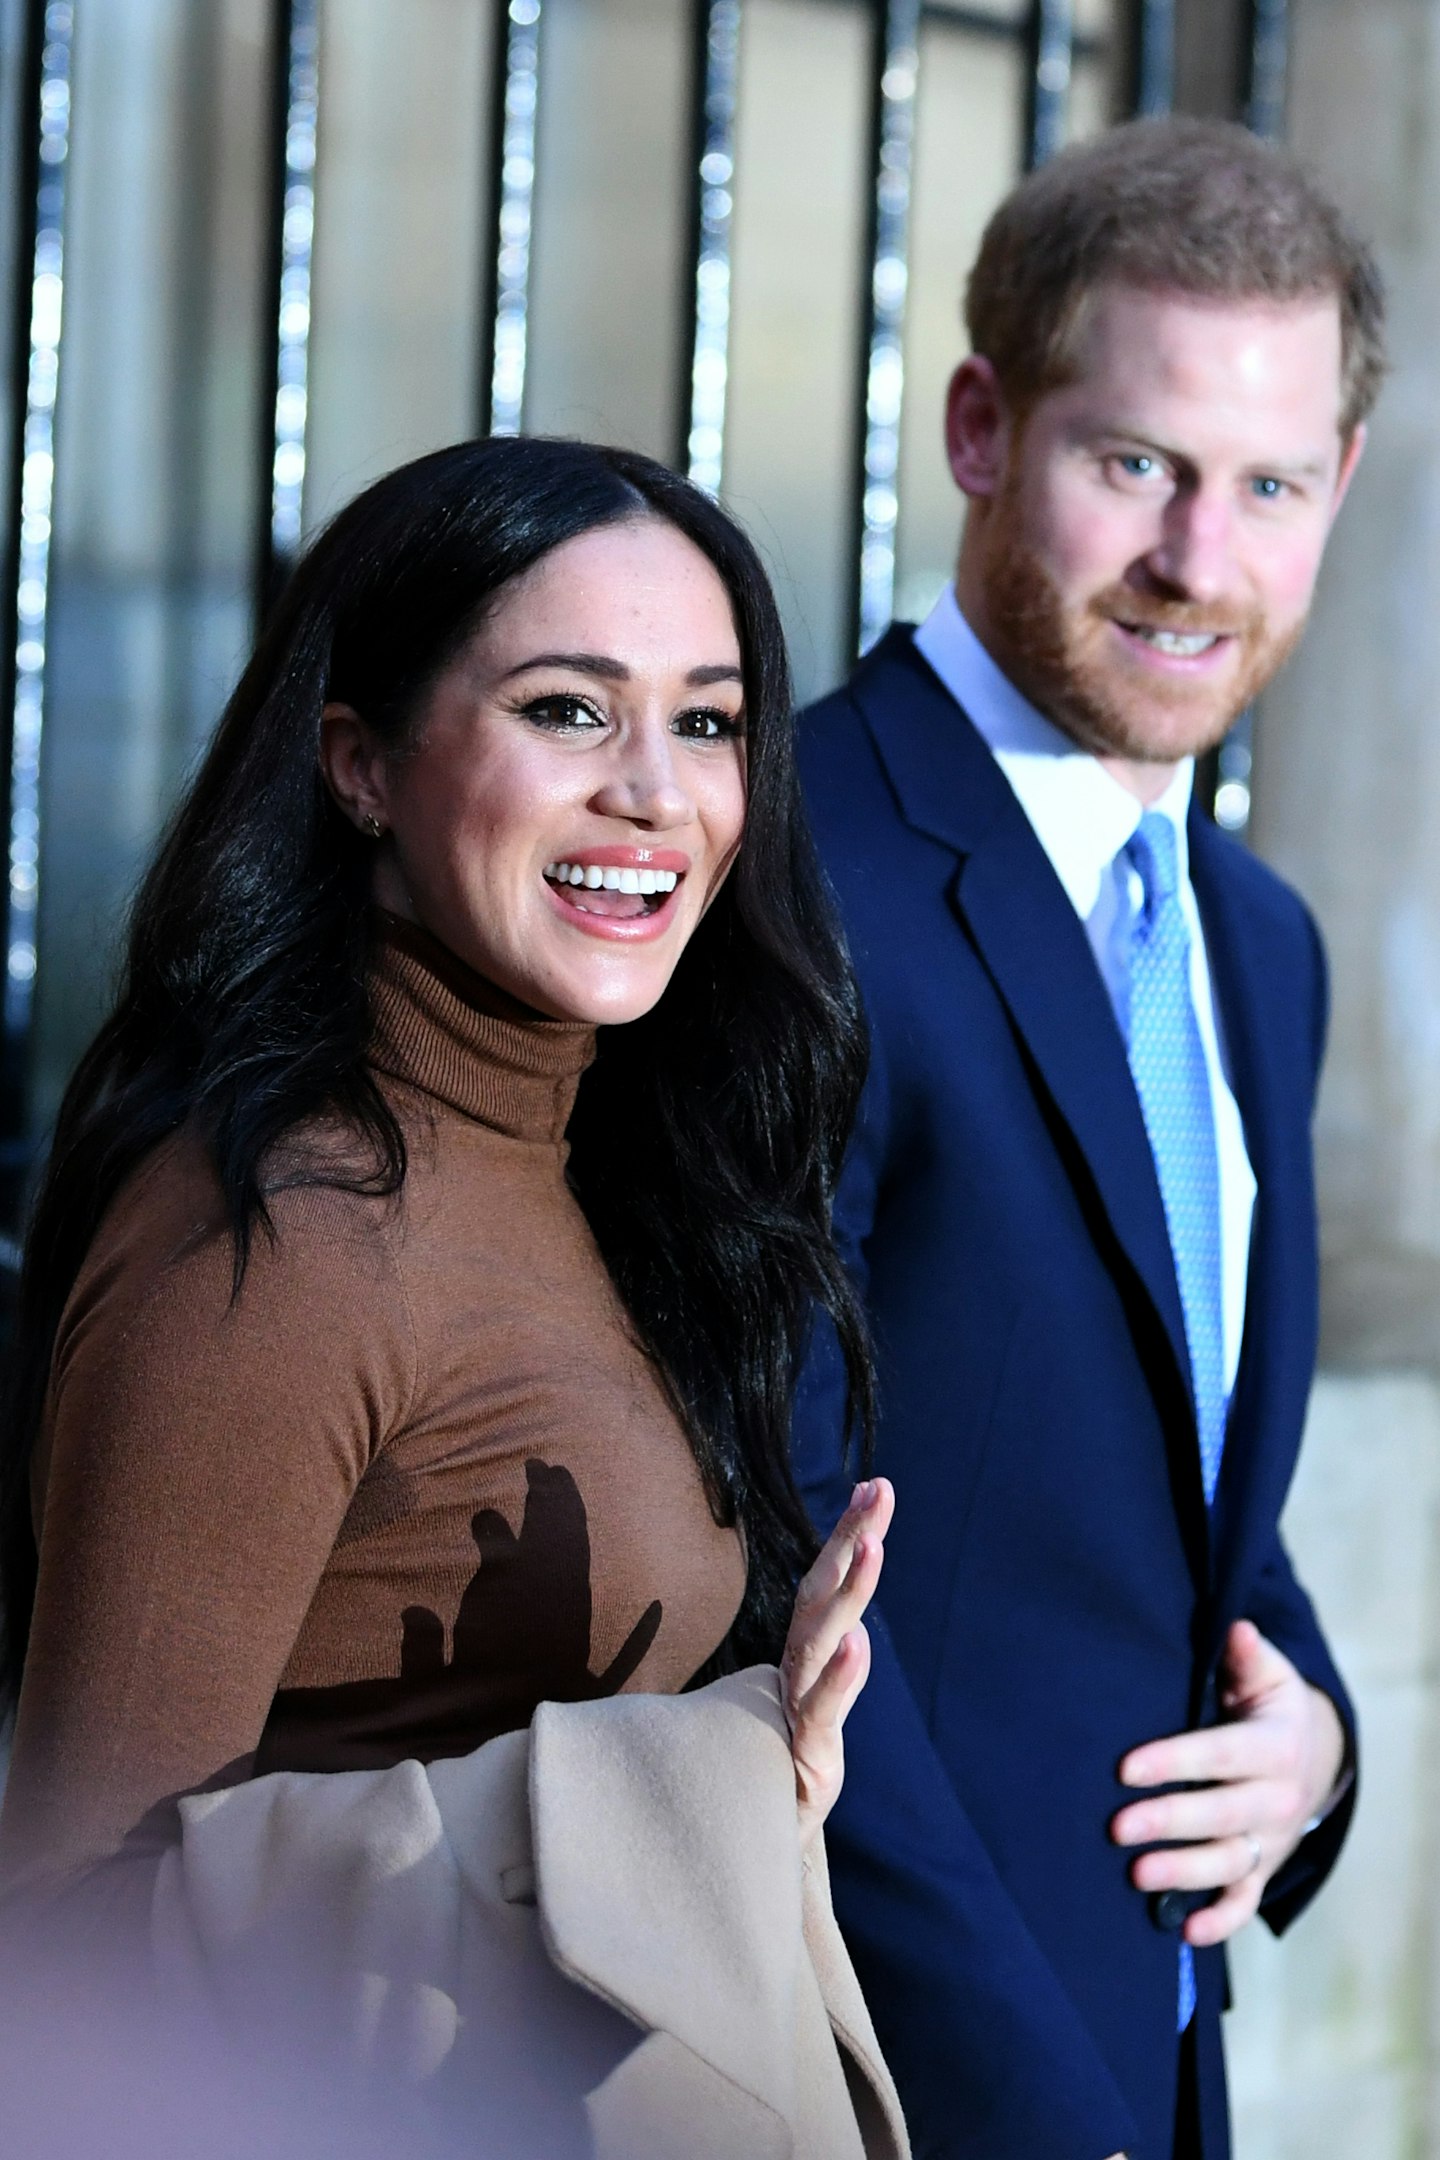 Meghan and Harry returning to London just before their decision to leave the Royal Family went public